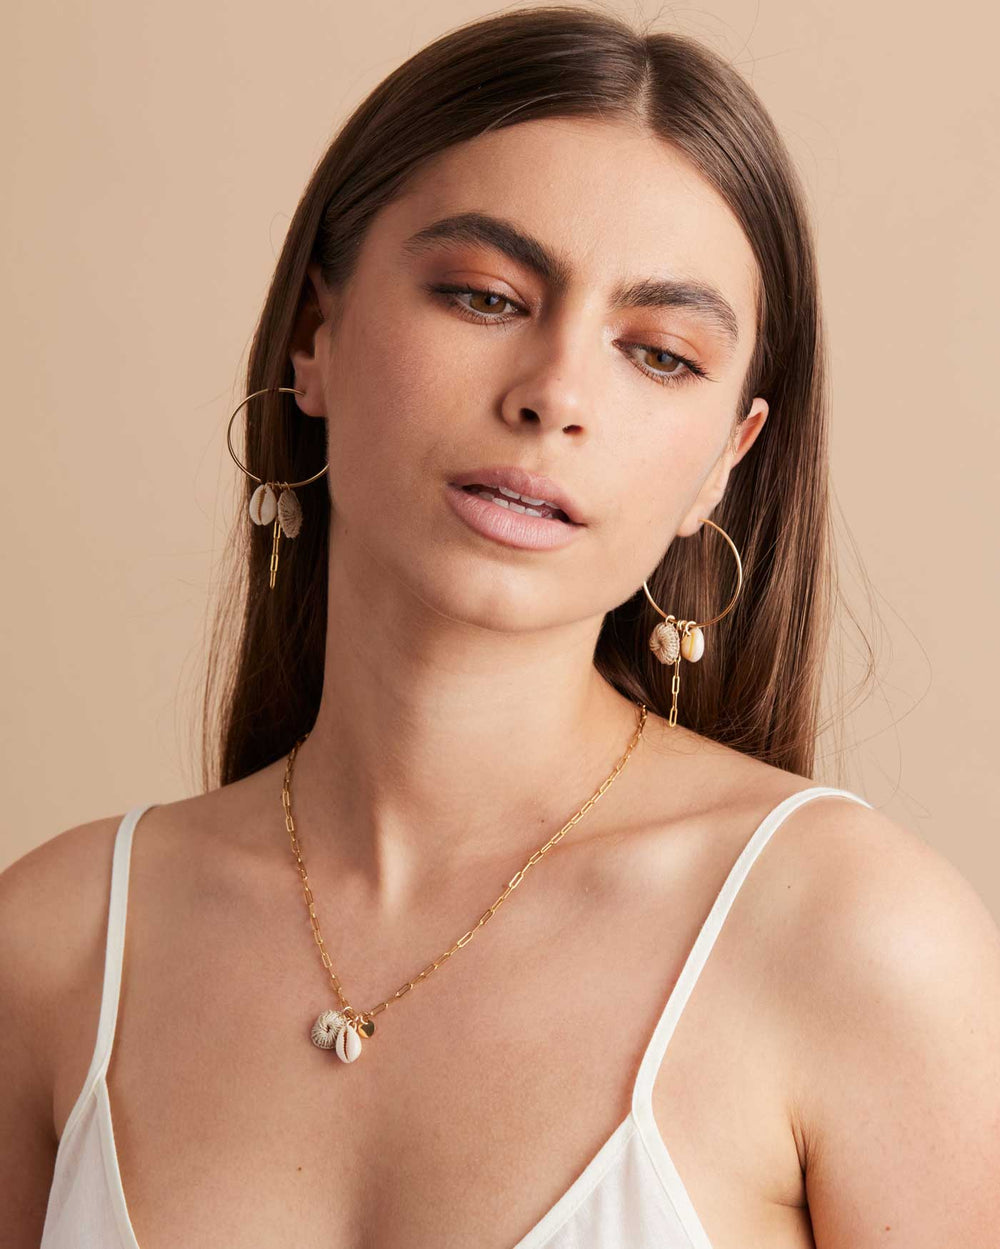 Model glancing wearing Bilum and Bilas gold filled paperclip chain necklace with pacific charms